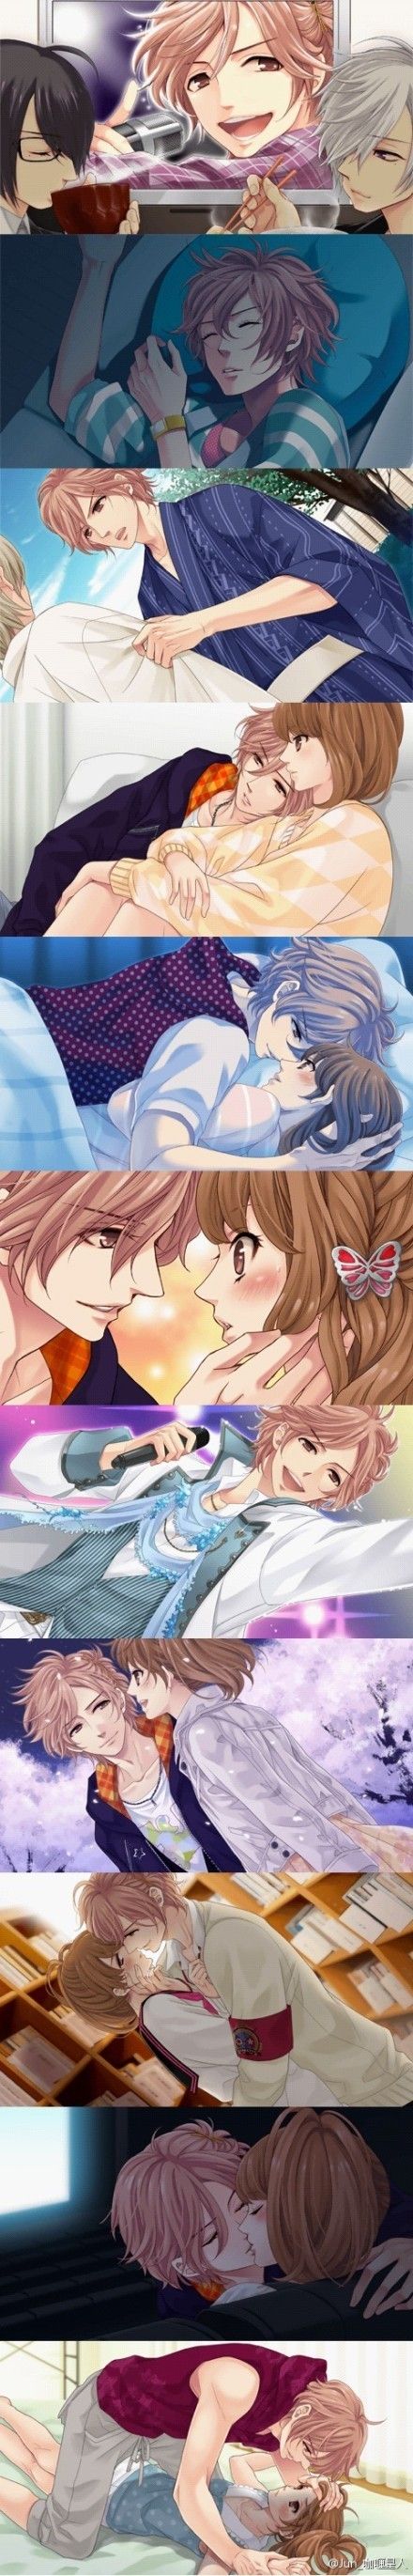 Brothers conflict: Futo and Ema